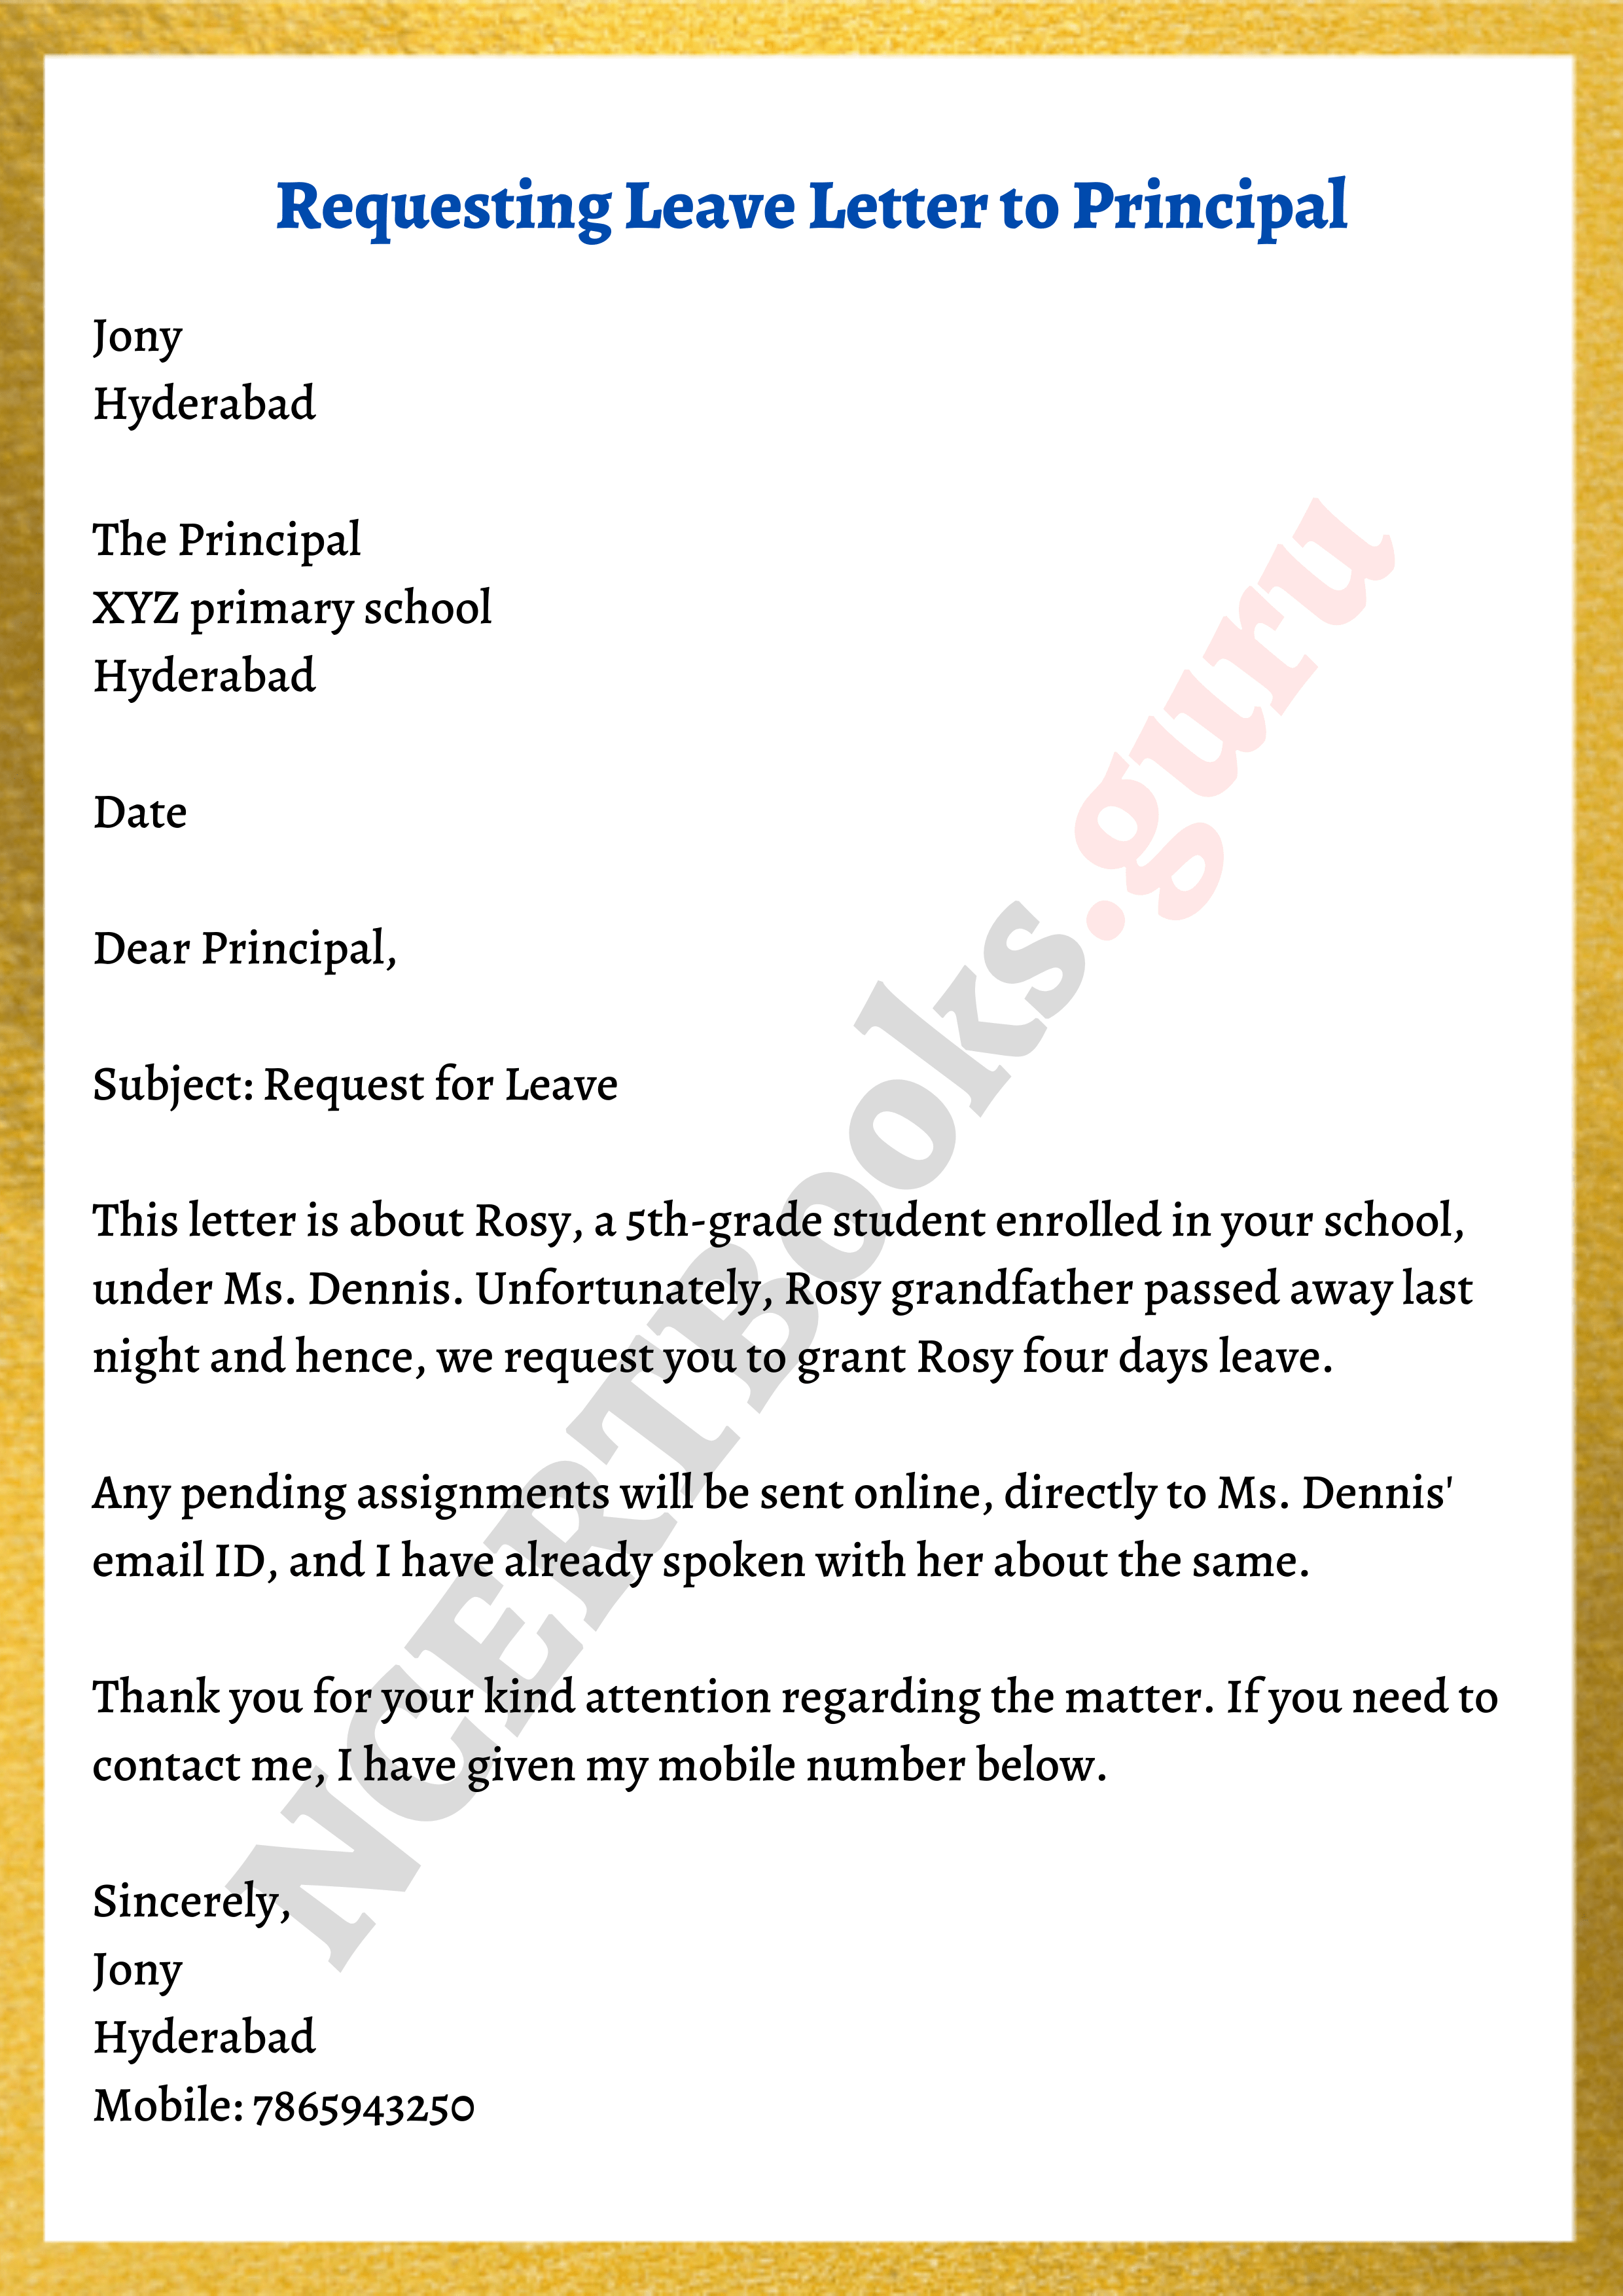 sample request leave letter to principal